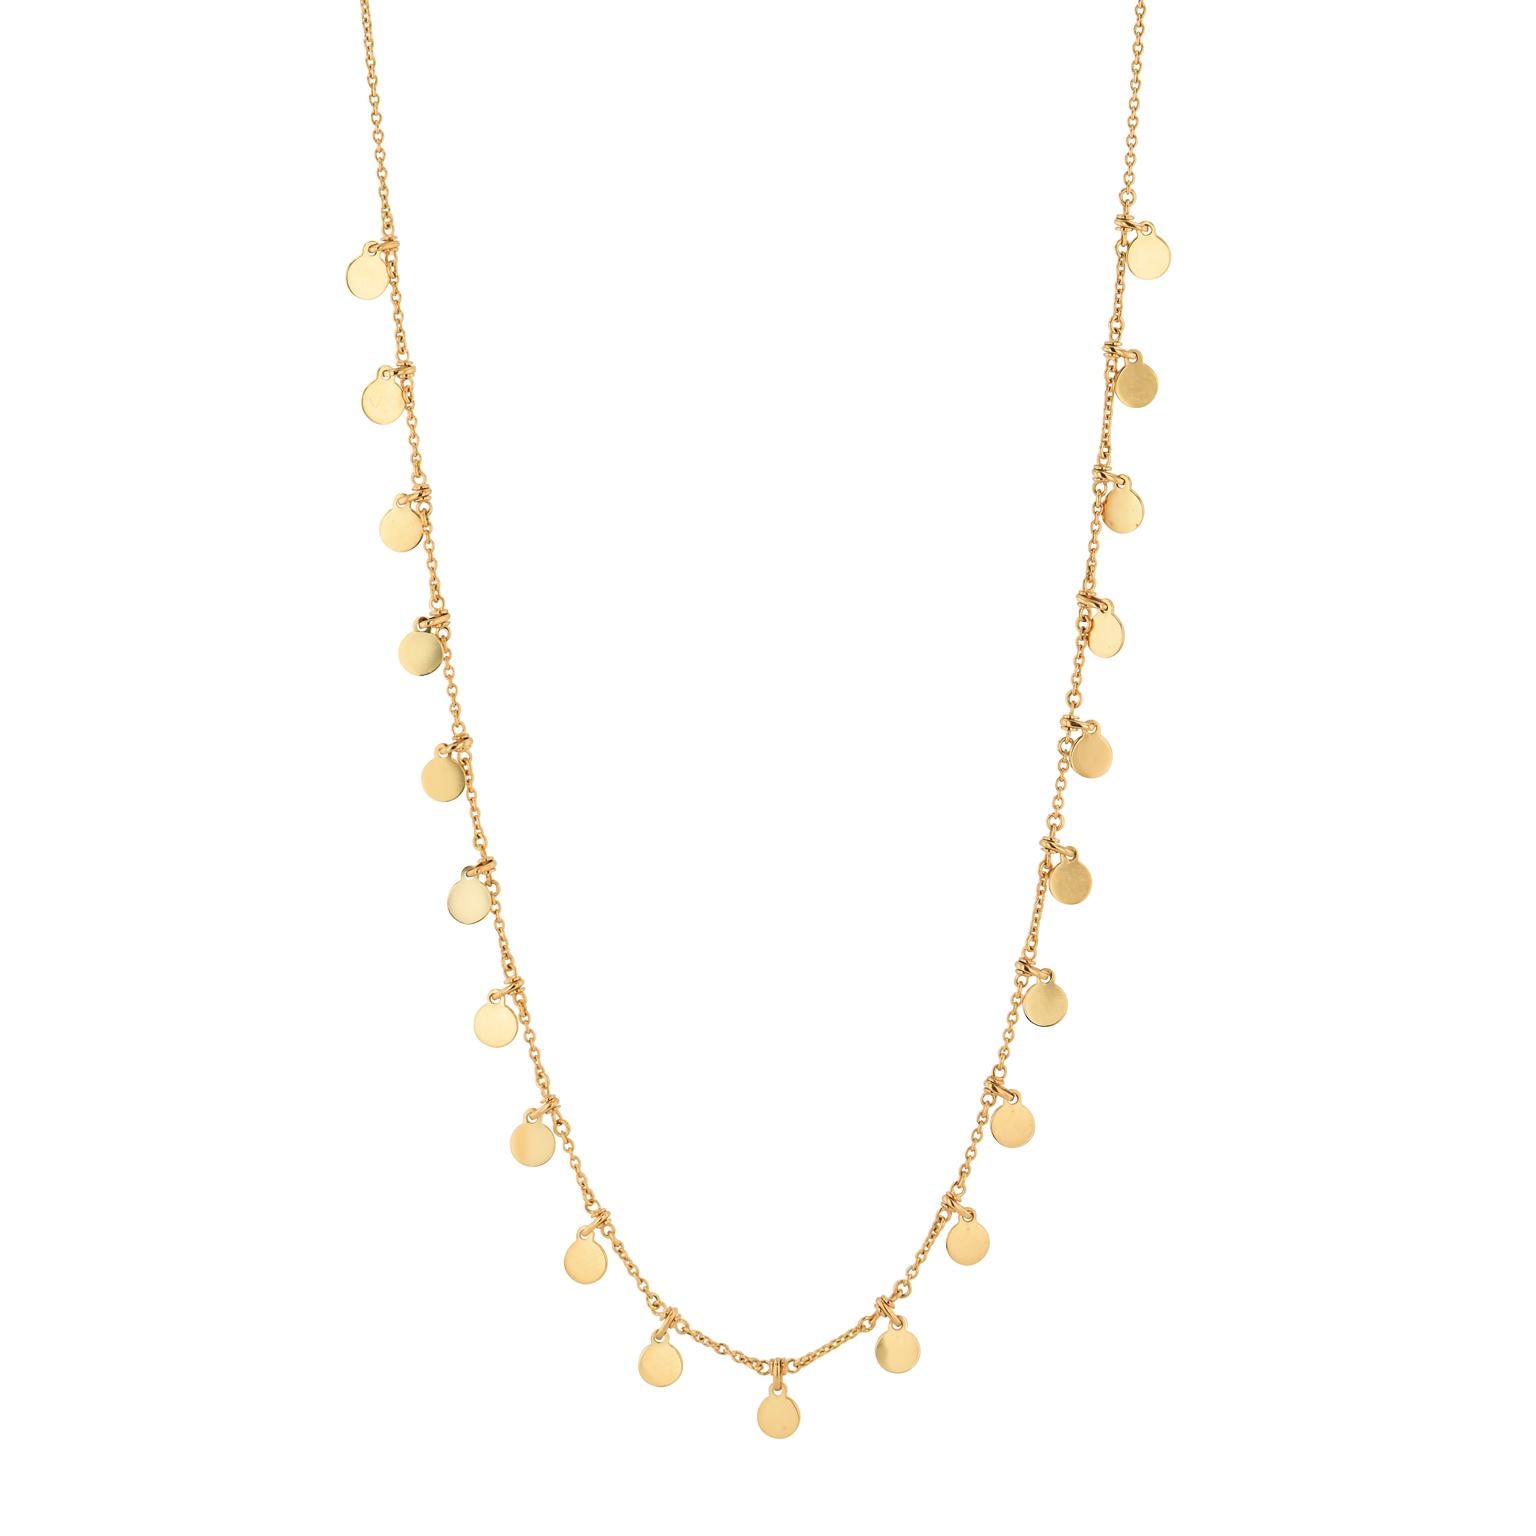 14 Karat Yellow Gold Disc Necklace

This 14 karat yellow gold disk necklace is an easy addition to any jewelry collection. 
It can be worn to the lengths of 19 or 21 inches, as there is a loop for you to connect to either.  

